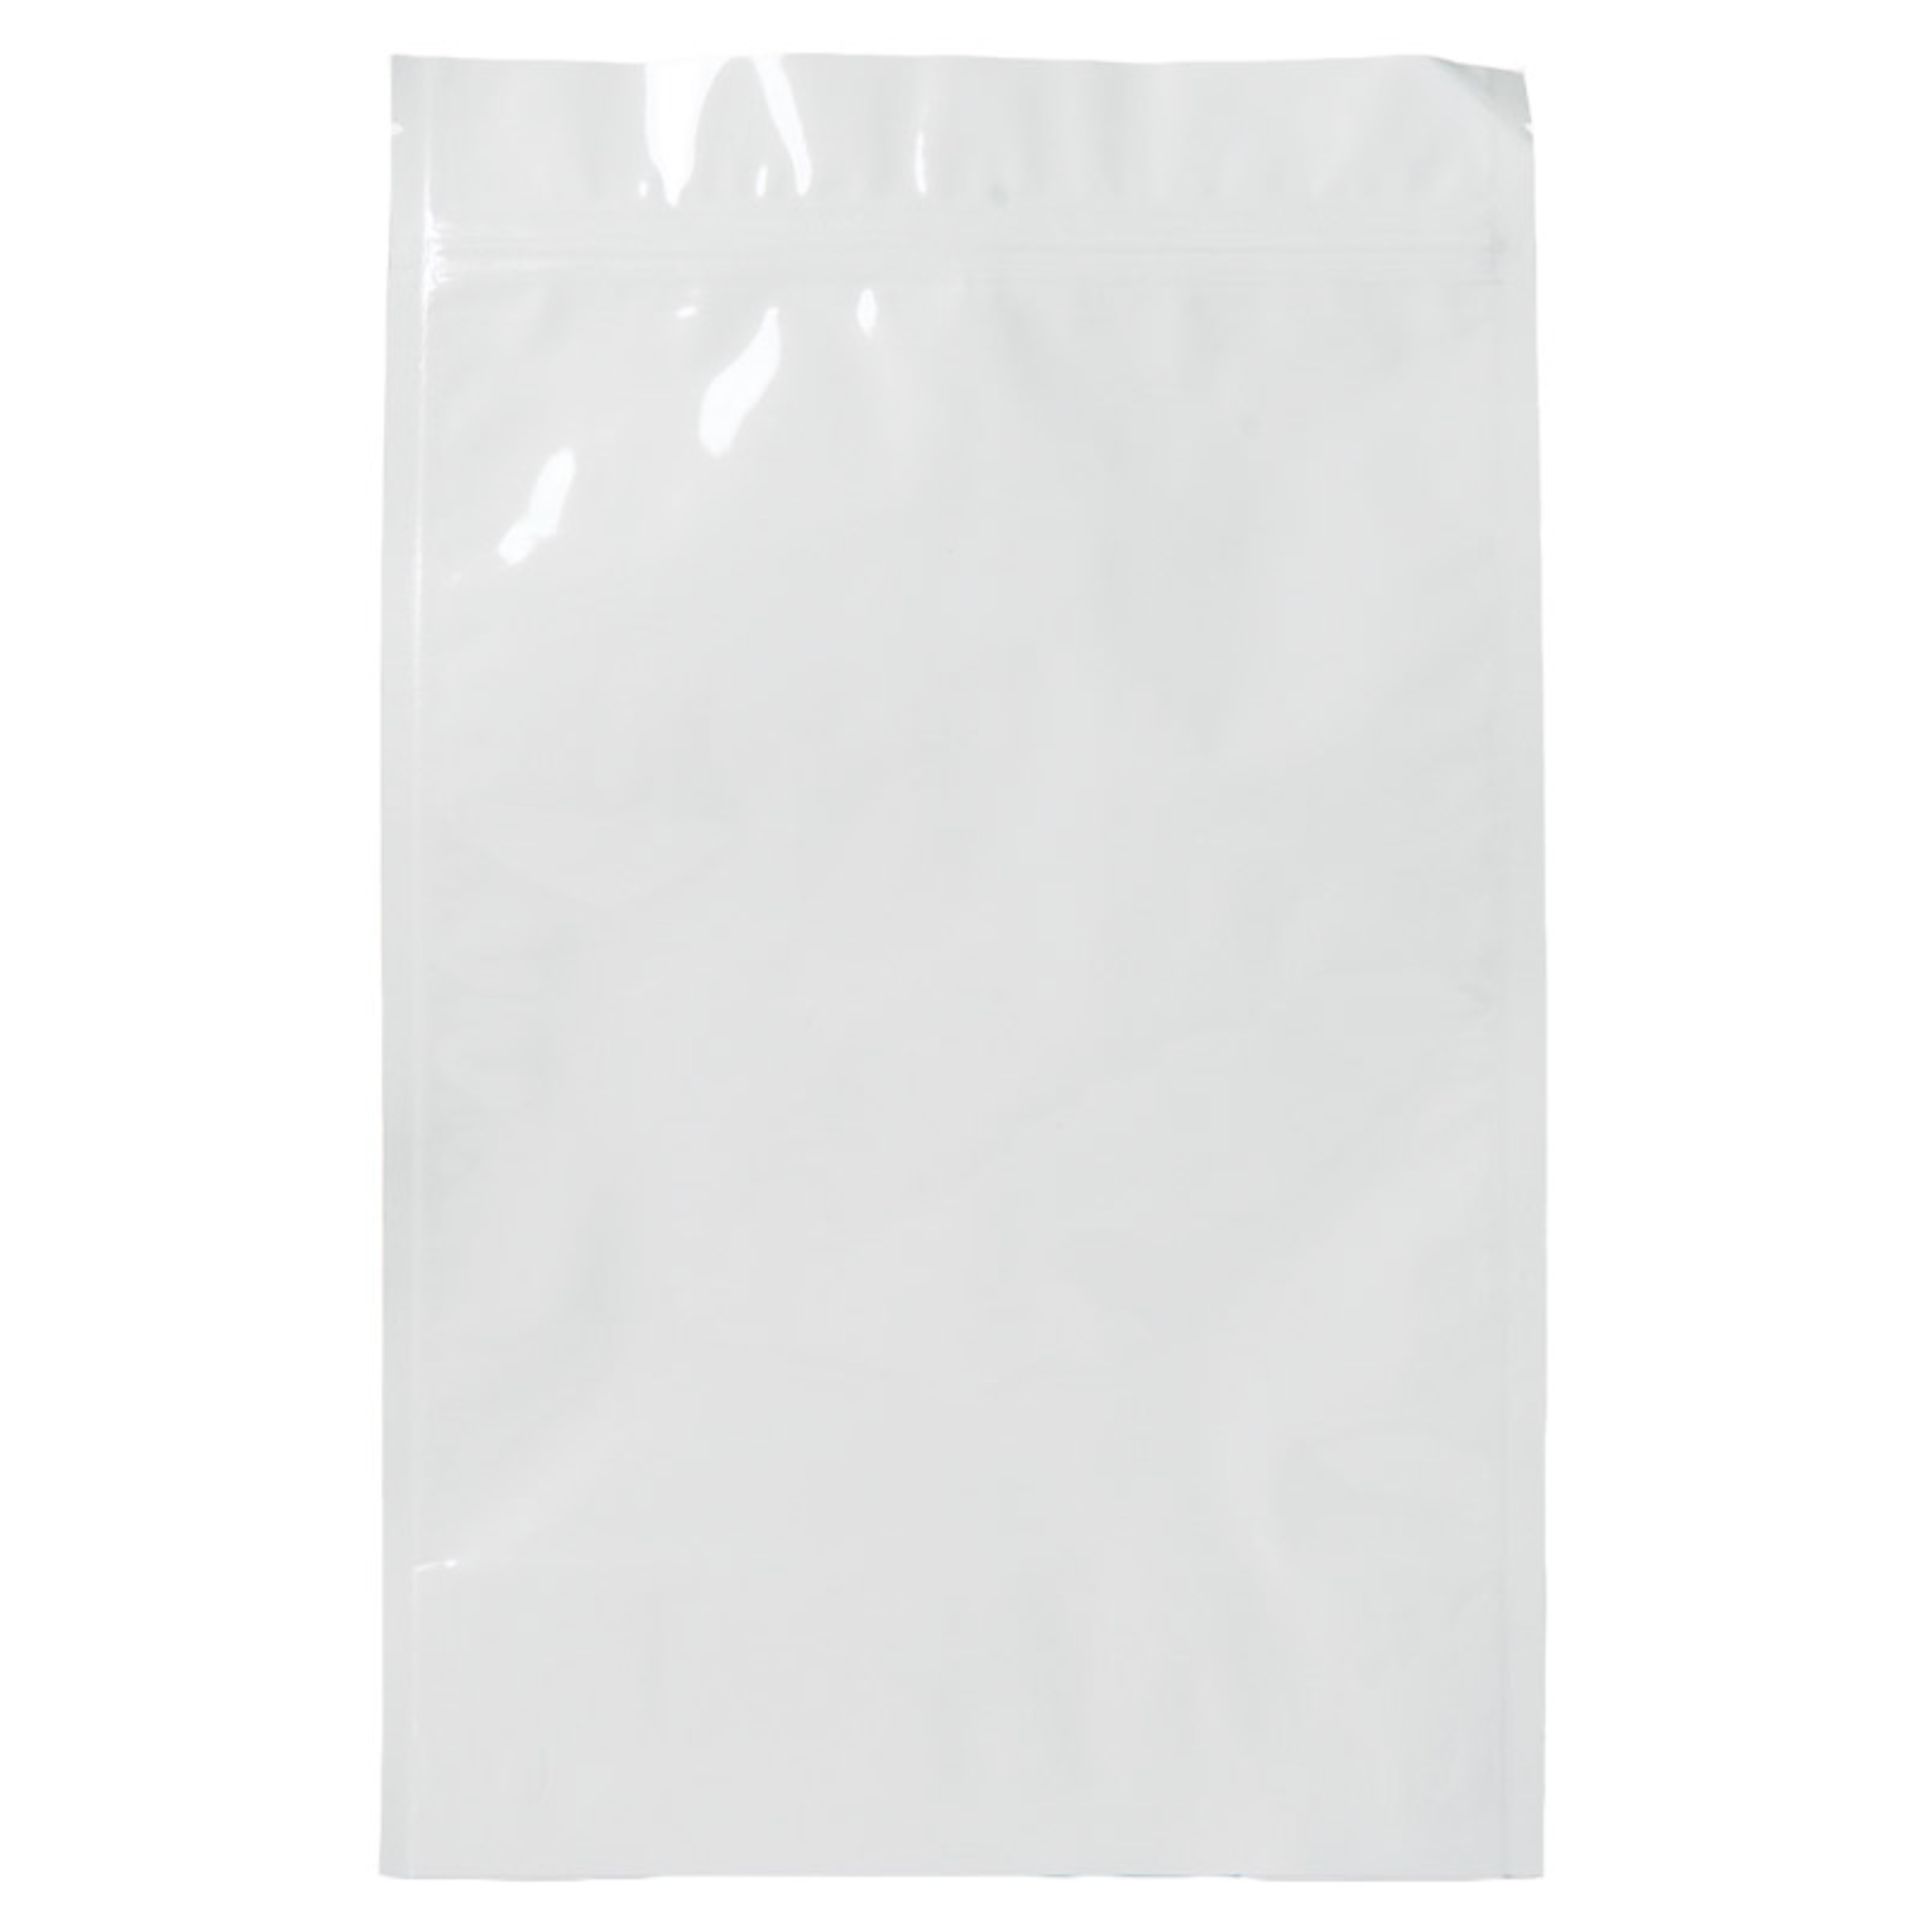 56g Barrier Bags White/White (Aprox Qty 12,000; 1 Pallet)